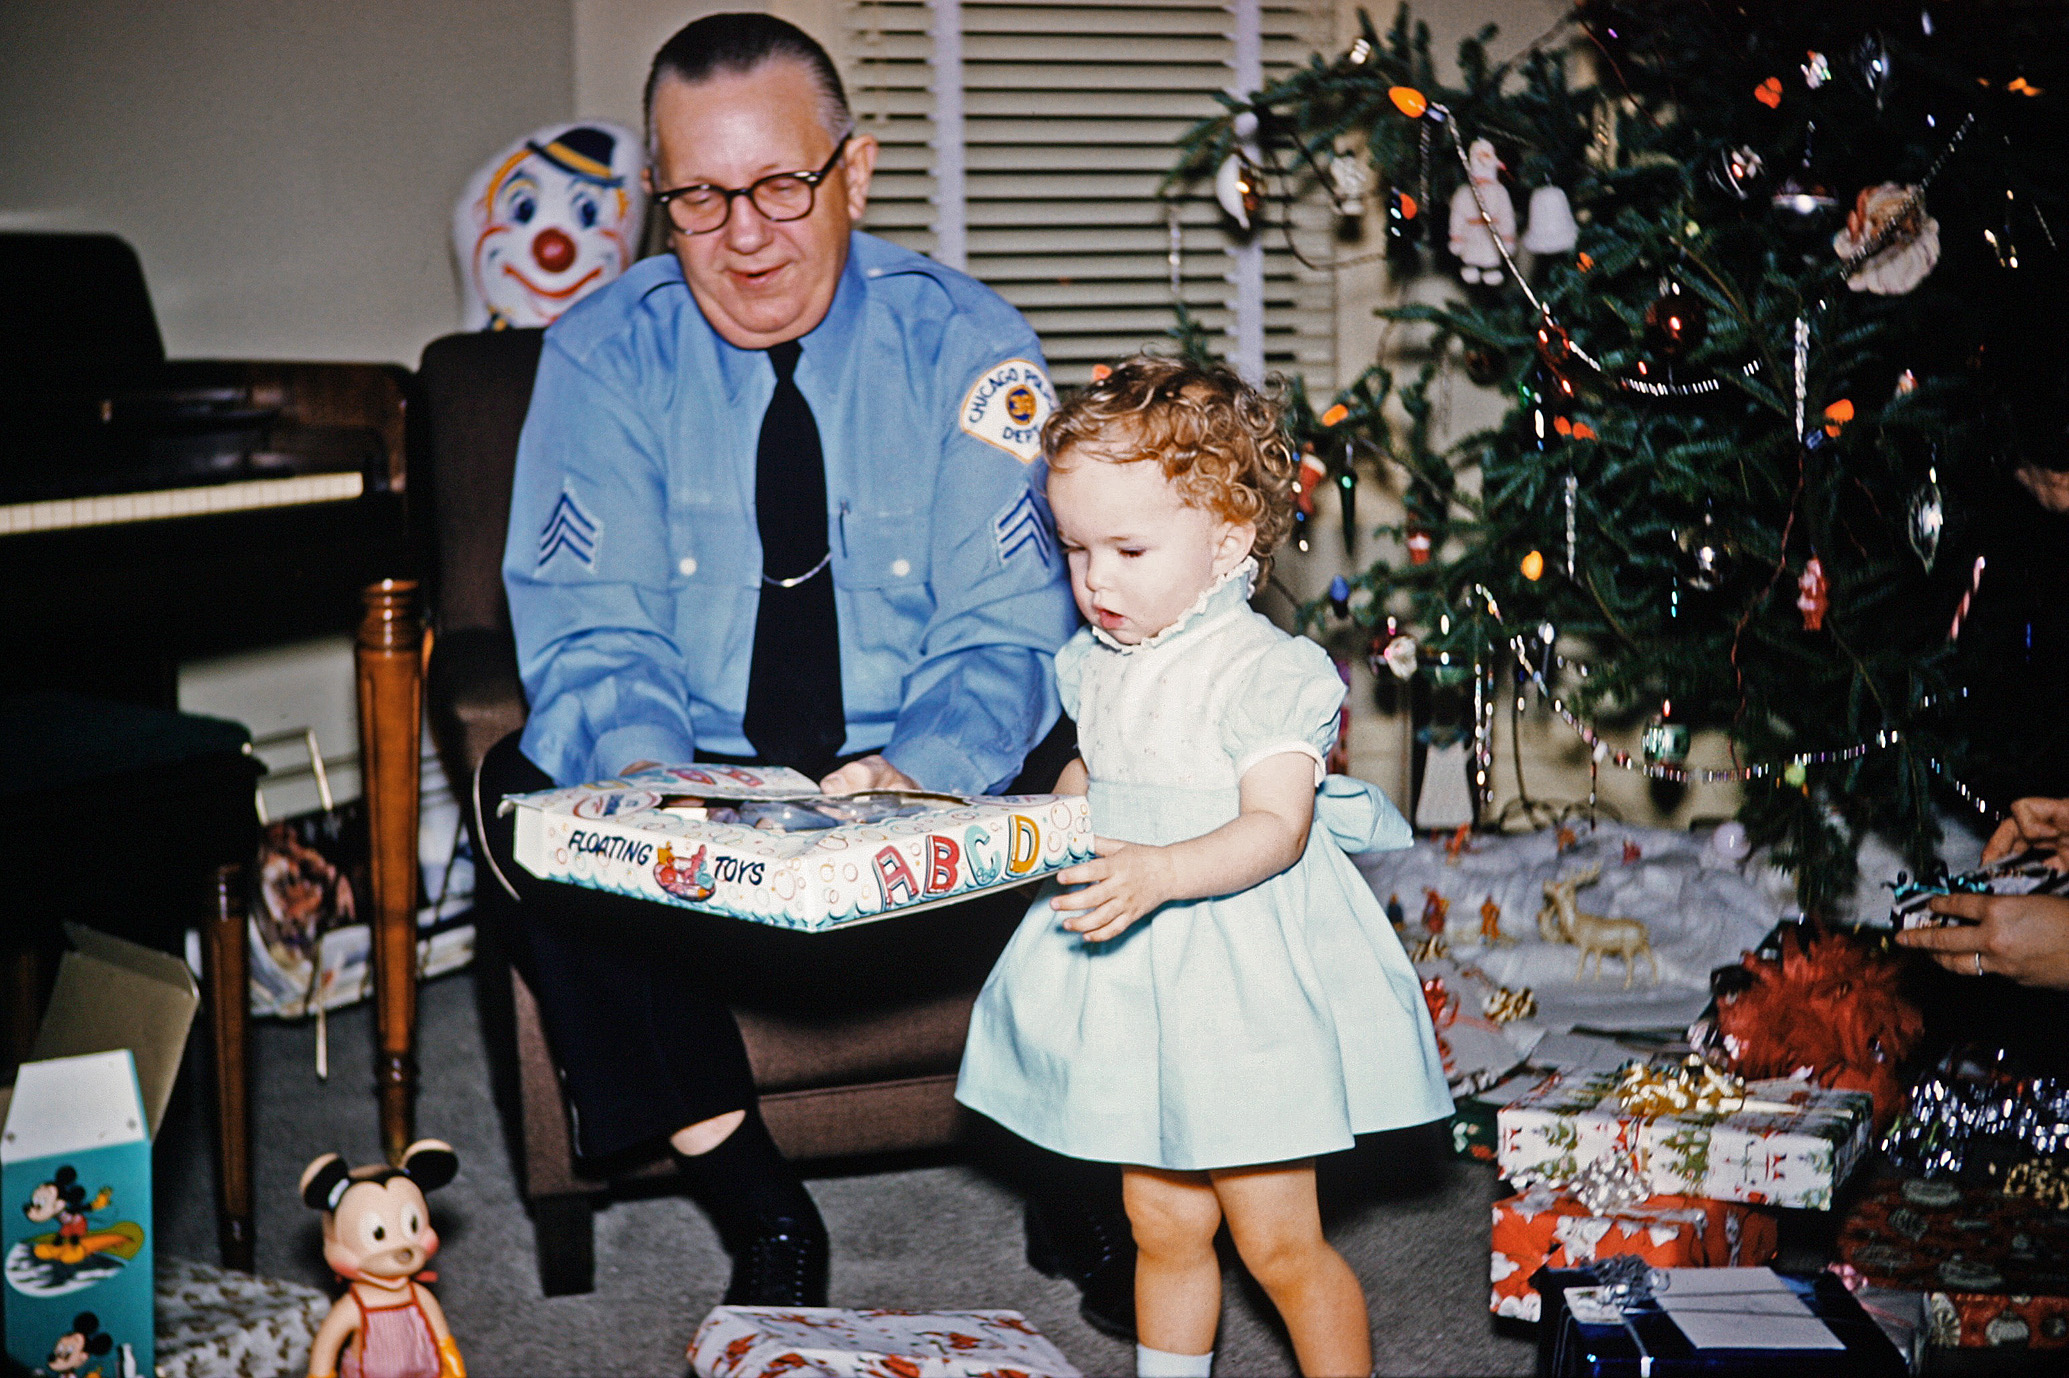 My mom, then just a toddler, opening presents with my great-grandfather at my great-grandparents' house on North Pulaski in Chicago. He was close to retirement as a sergeant with the Chicago Police Department when this was taken. He passed on prior to my memory, but Great-Grandma (or GG as we called her for short) continued to live here until dementia took her independence in the early 1990s. View full size.